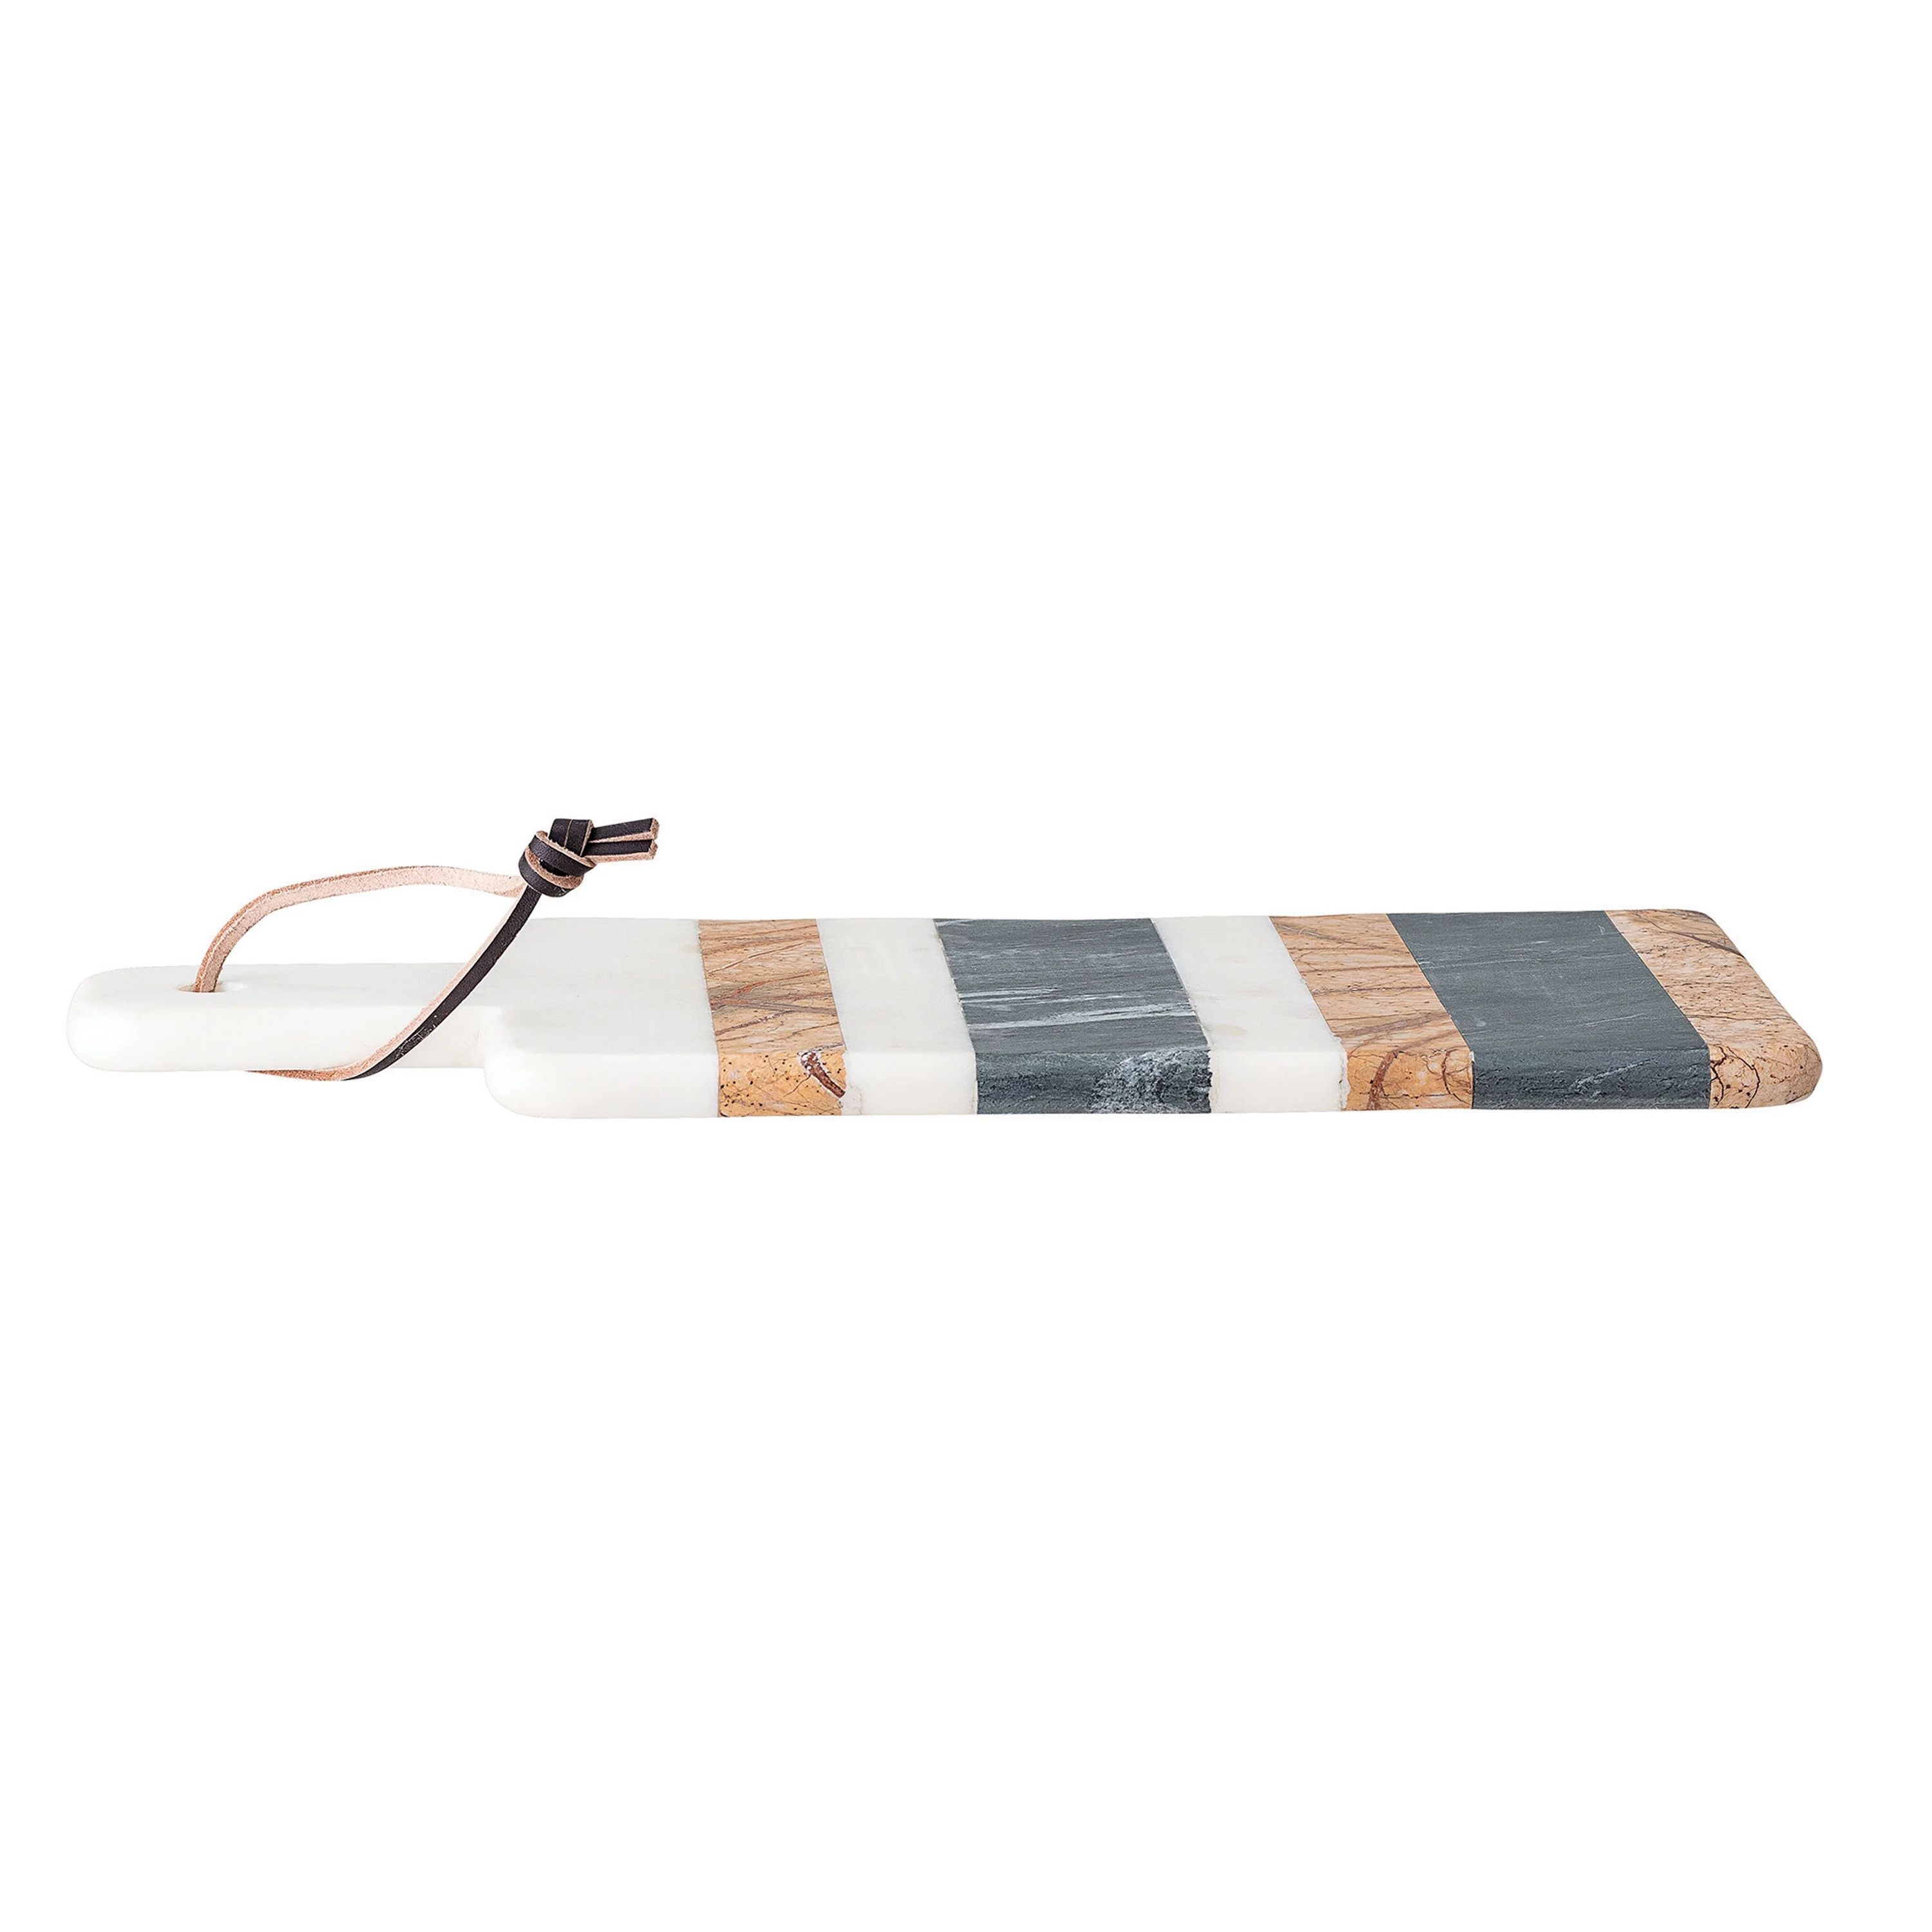 Bloomingville 15" Rectangle Marble Cheese/Cutting Board with Stripes, Handle & Leather Strap | Walmart (US)